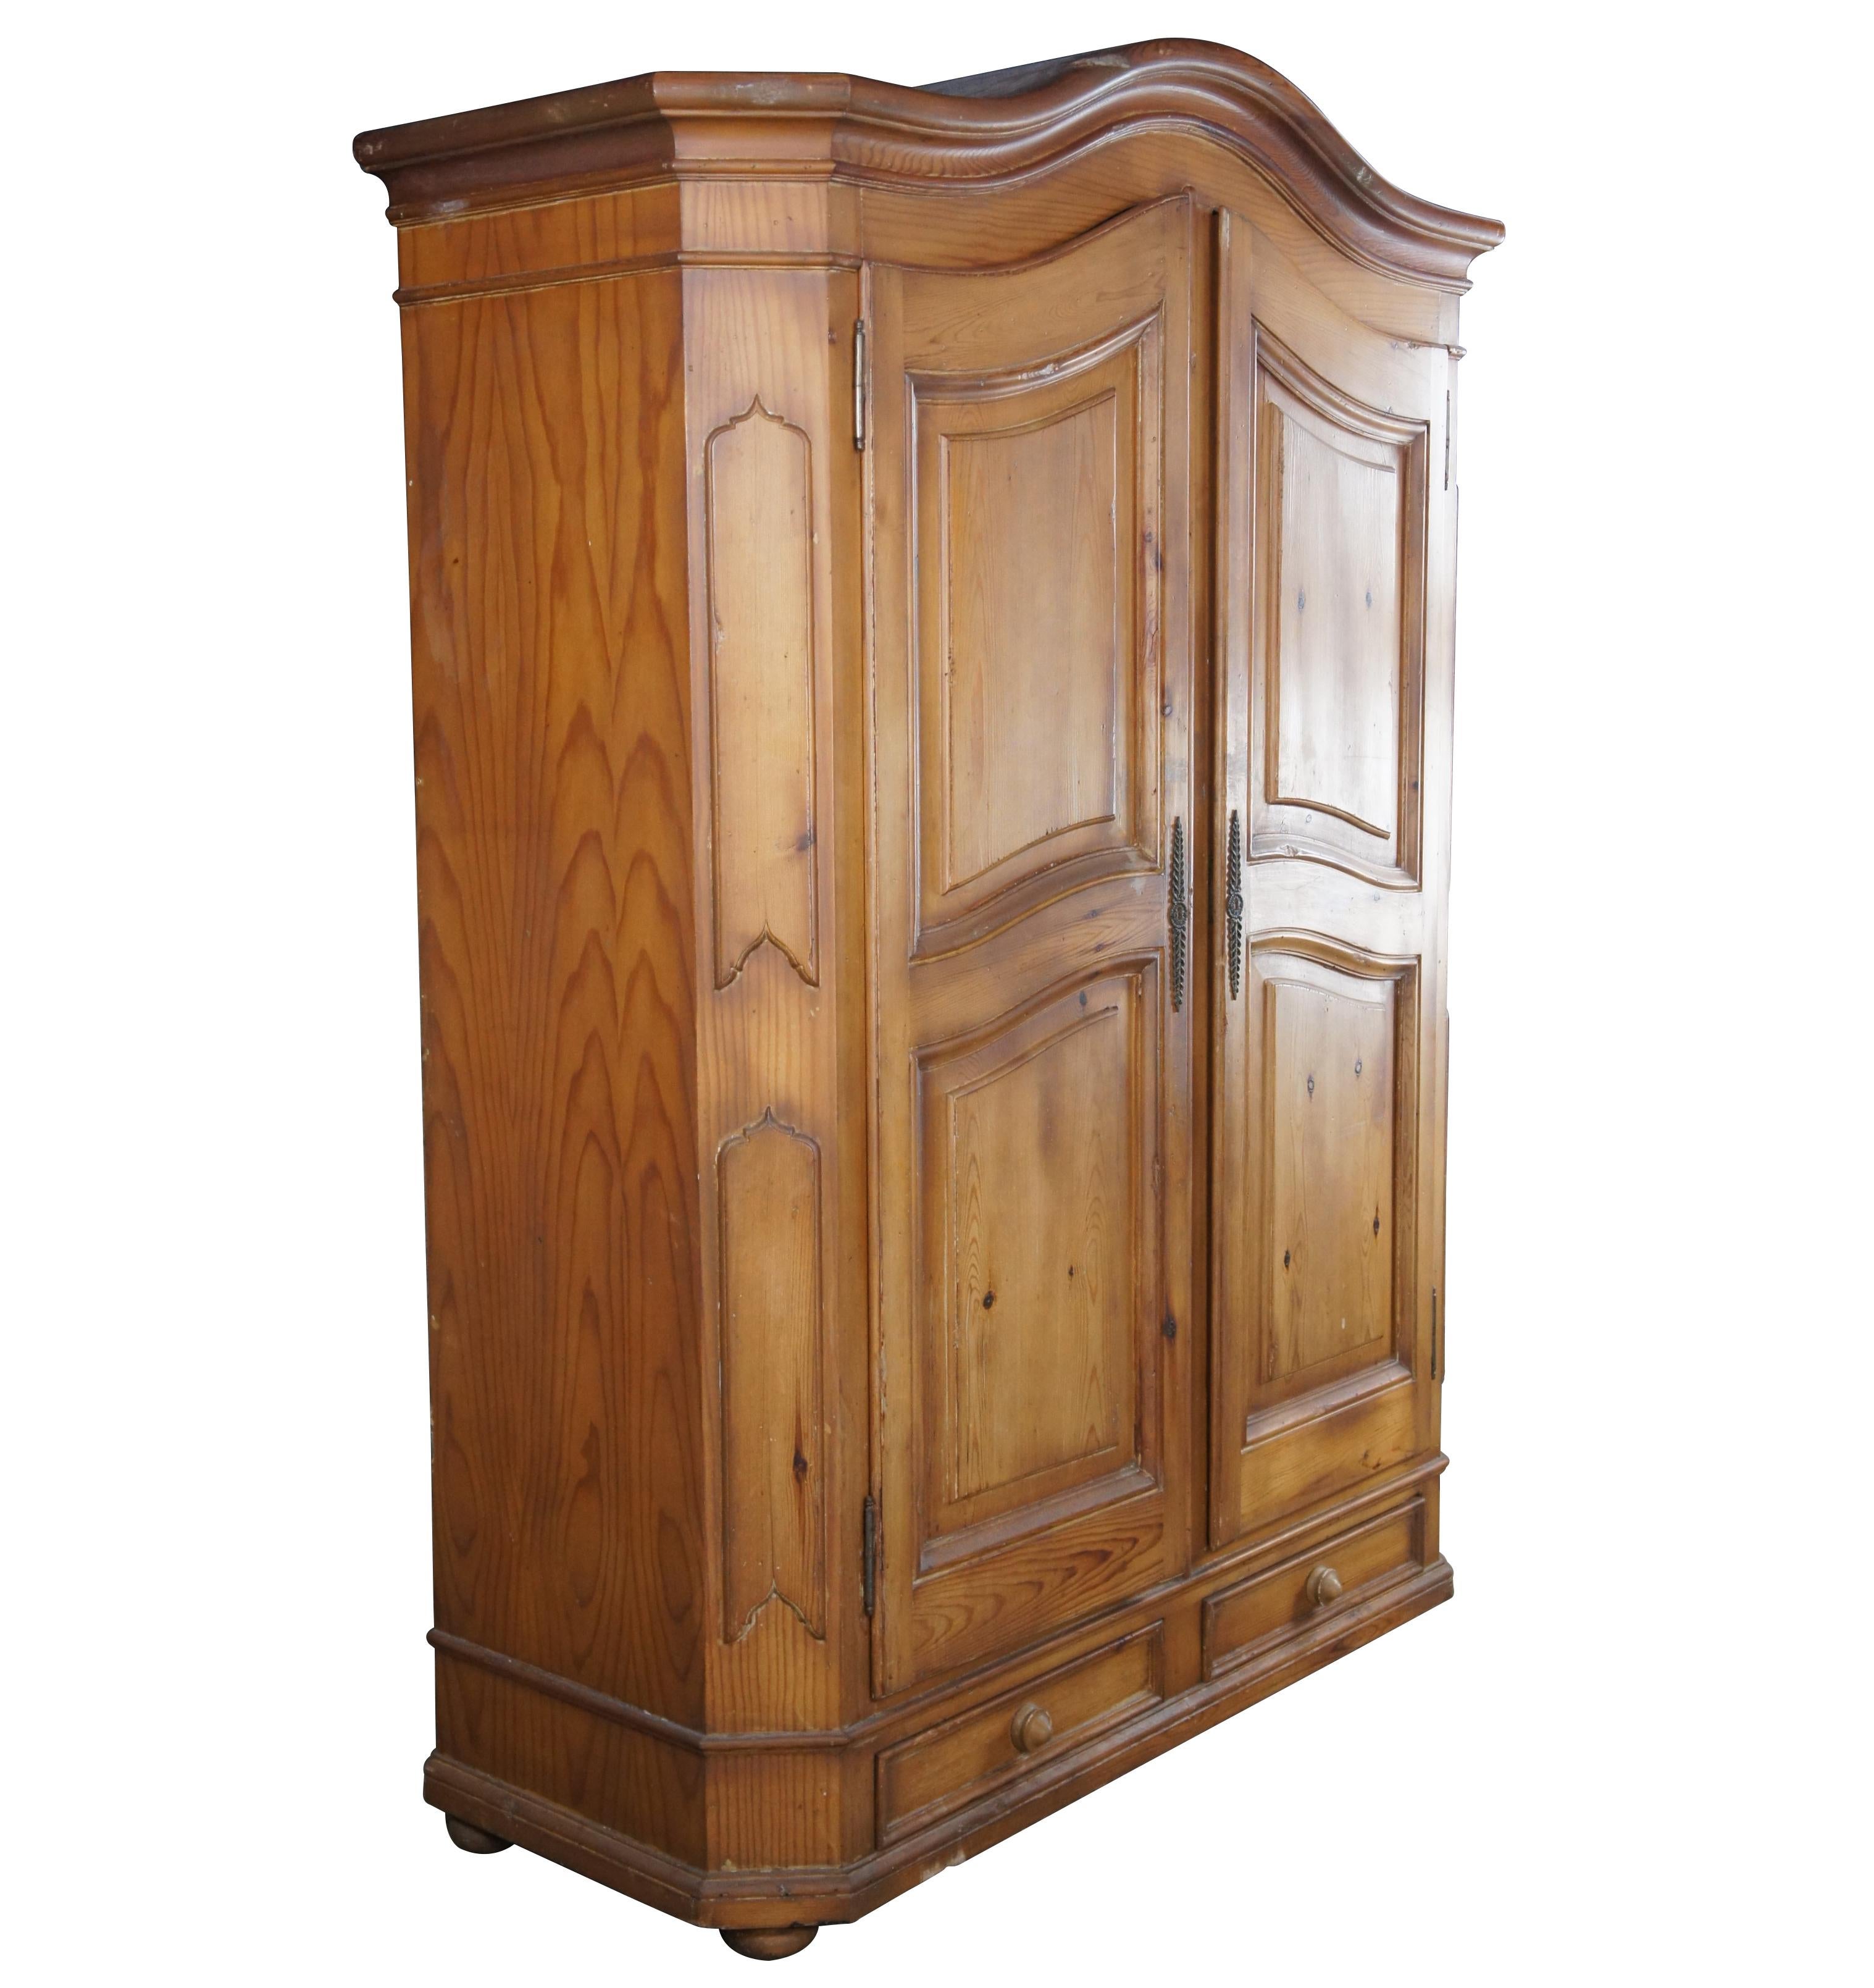 An exquisite armoire from Garcia Imports. Made in Spain from a distressed pine. Includes a chifforobe setup with hanging bar along the left, 3 interior shelves to the right and lower drawers with a key for locking. Garcia specializes in reproducing